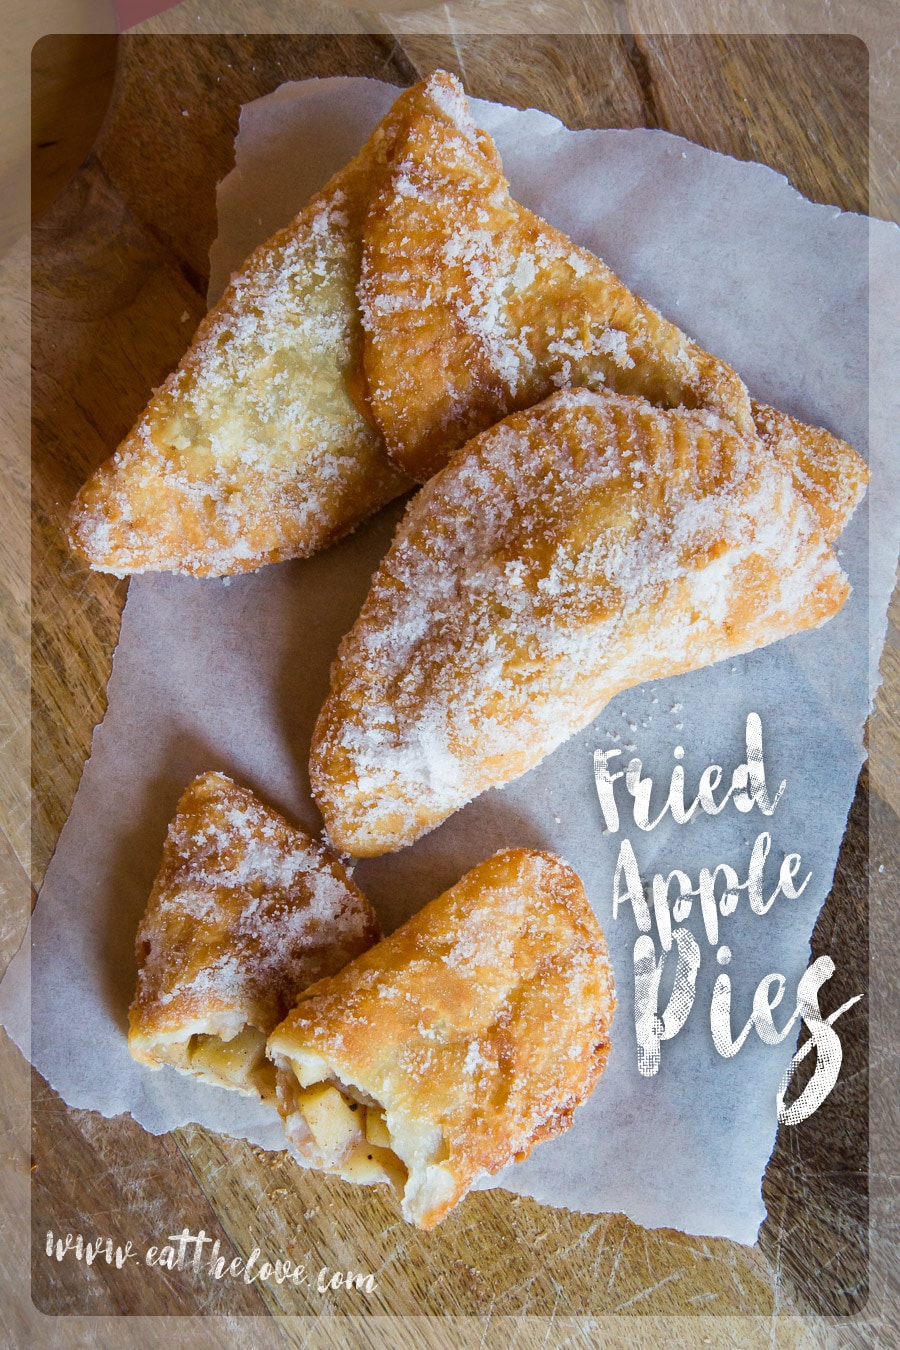 Fried Apple Pies. Photo and recipe by Irvin Lin of Eat the Love.